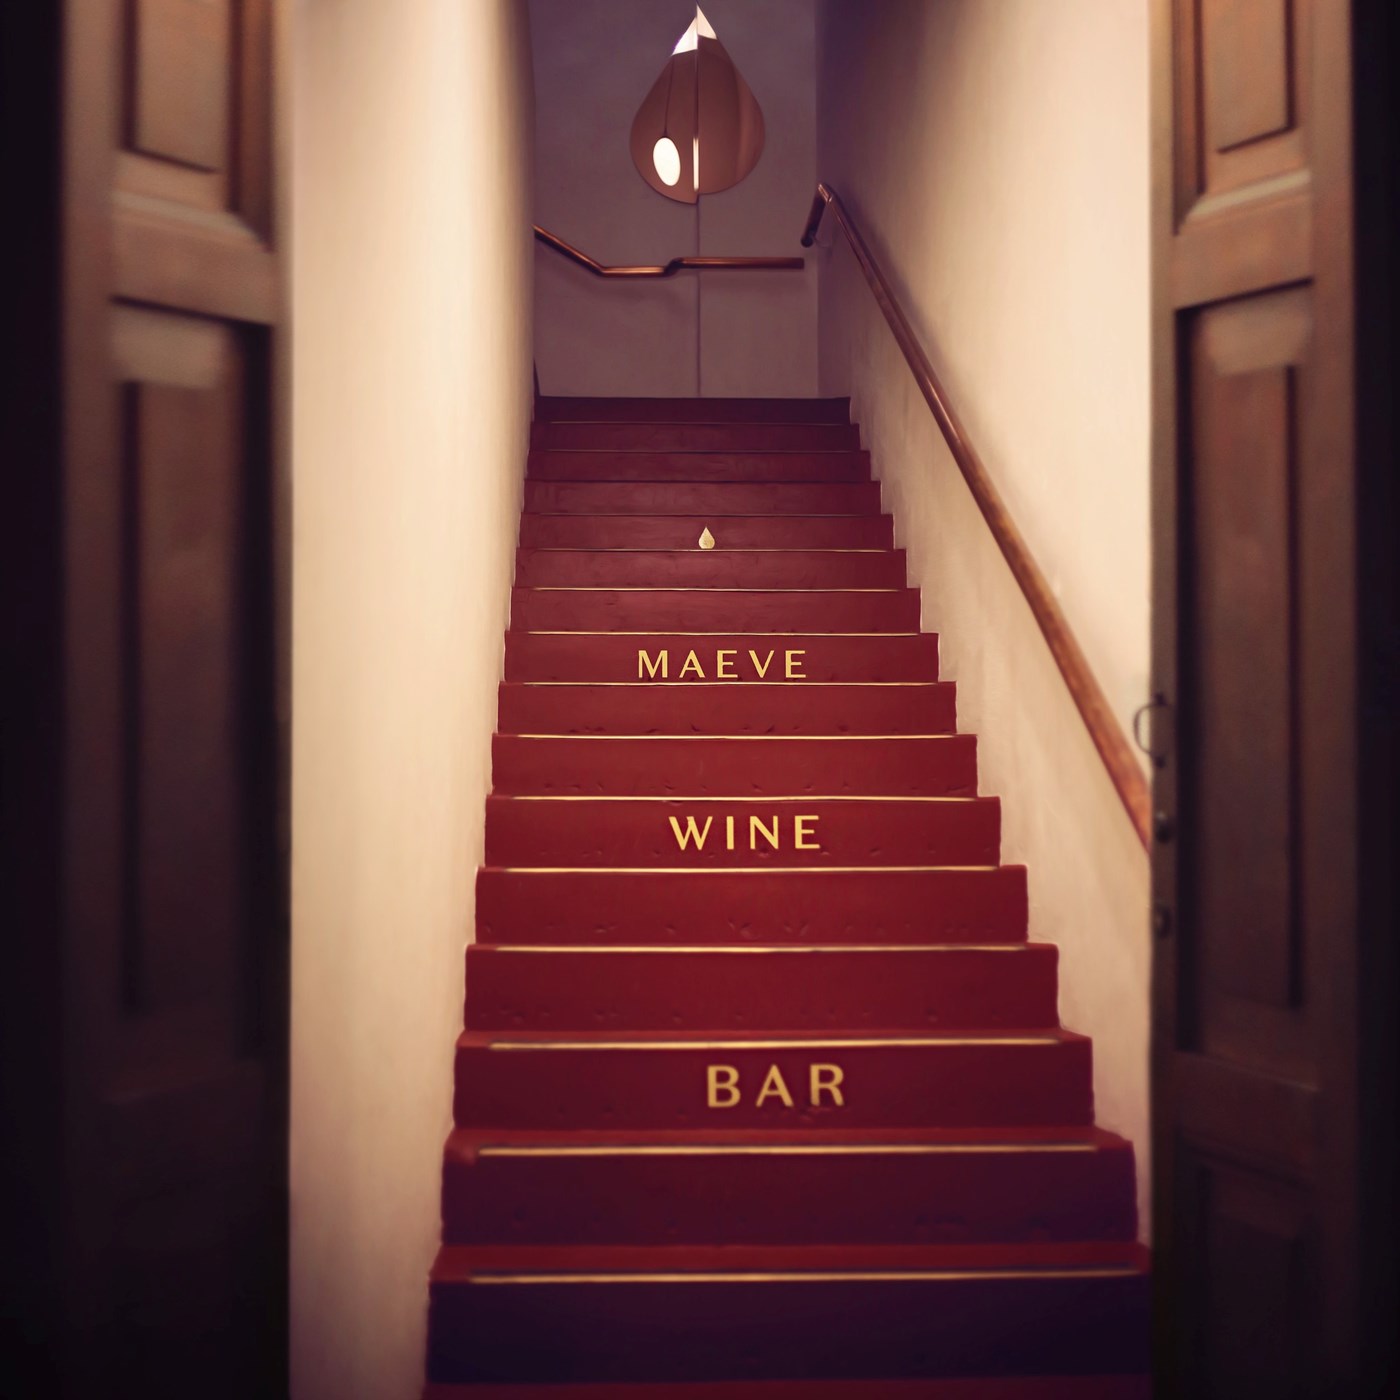 The staircase entrance at Maeve Wine Bar in Brisbane